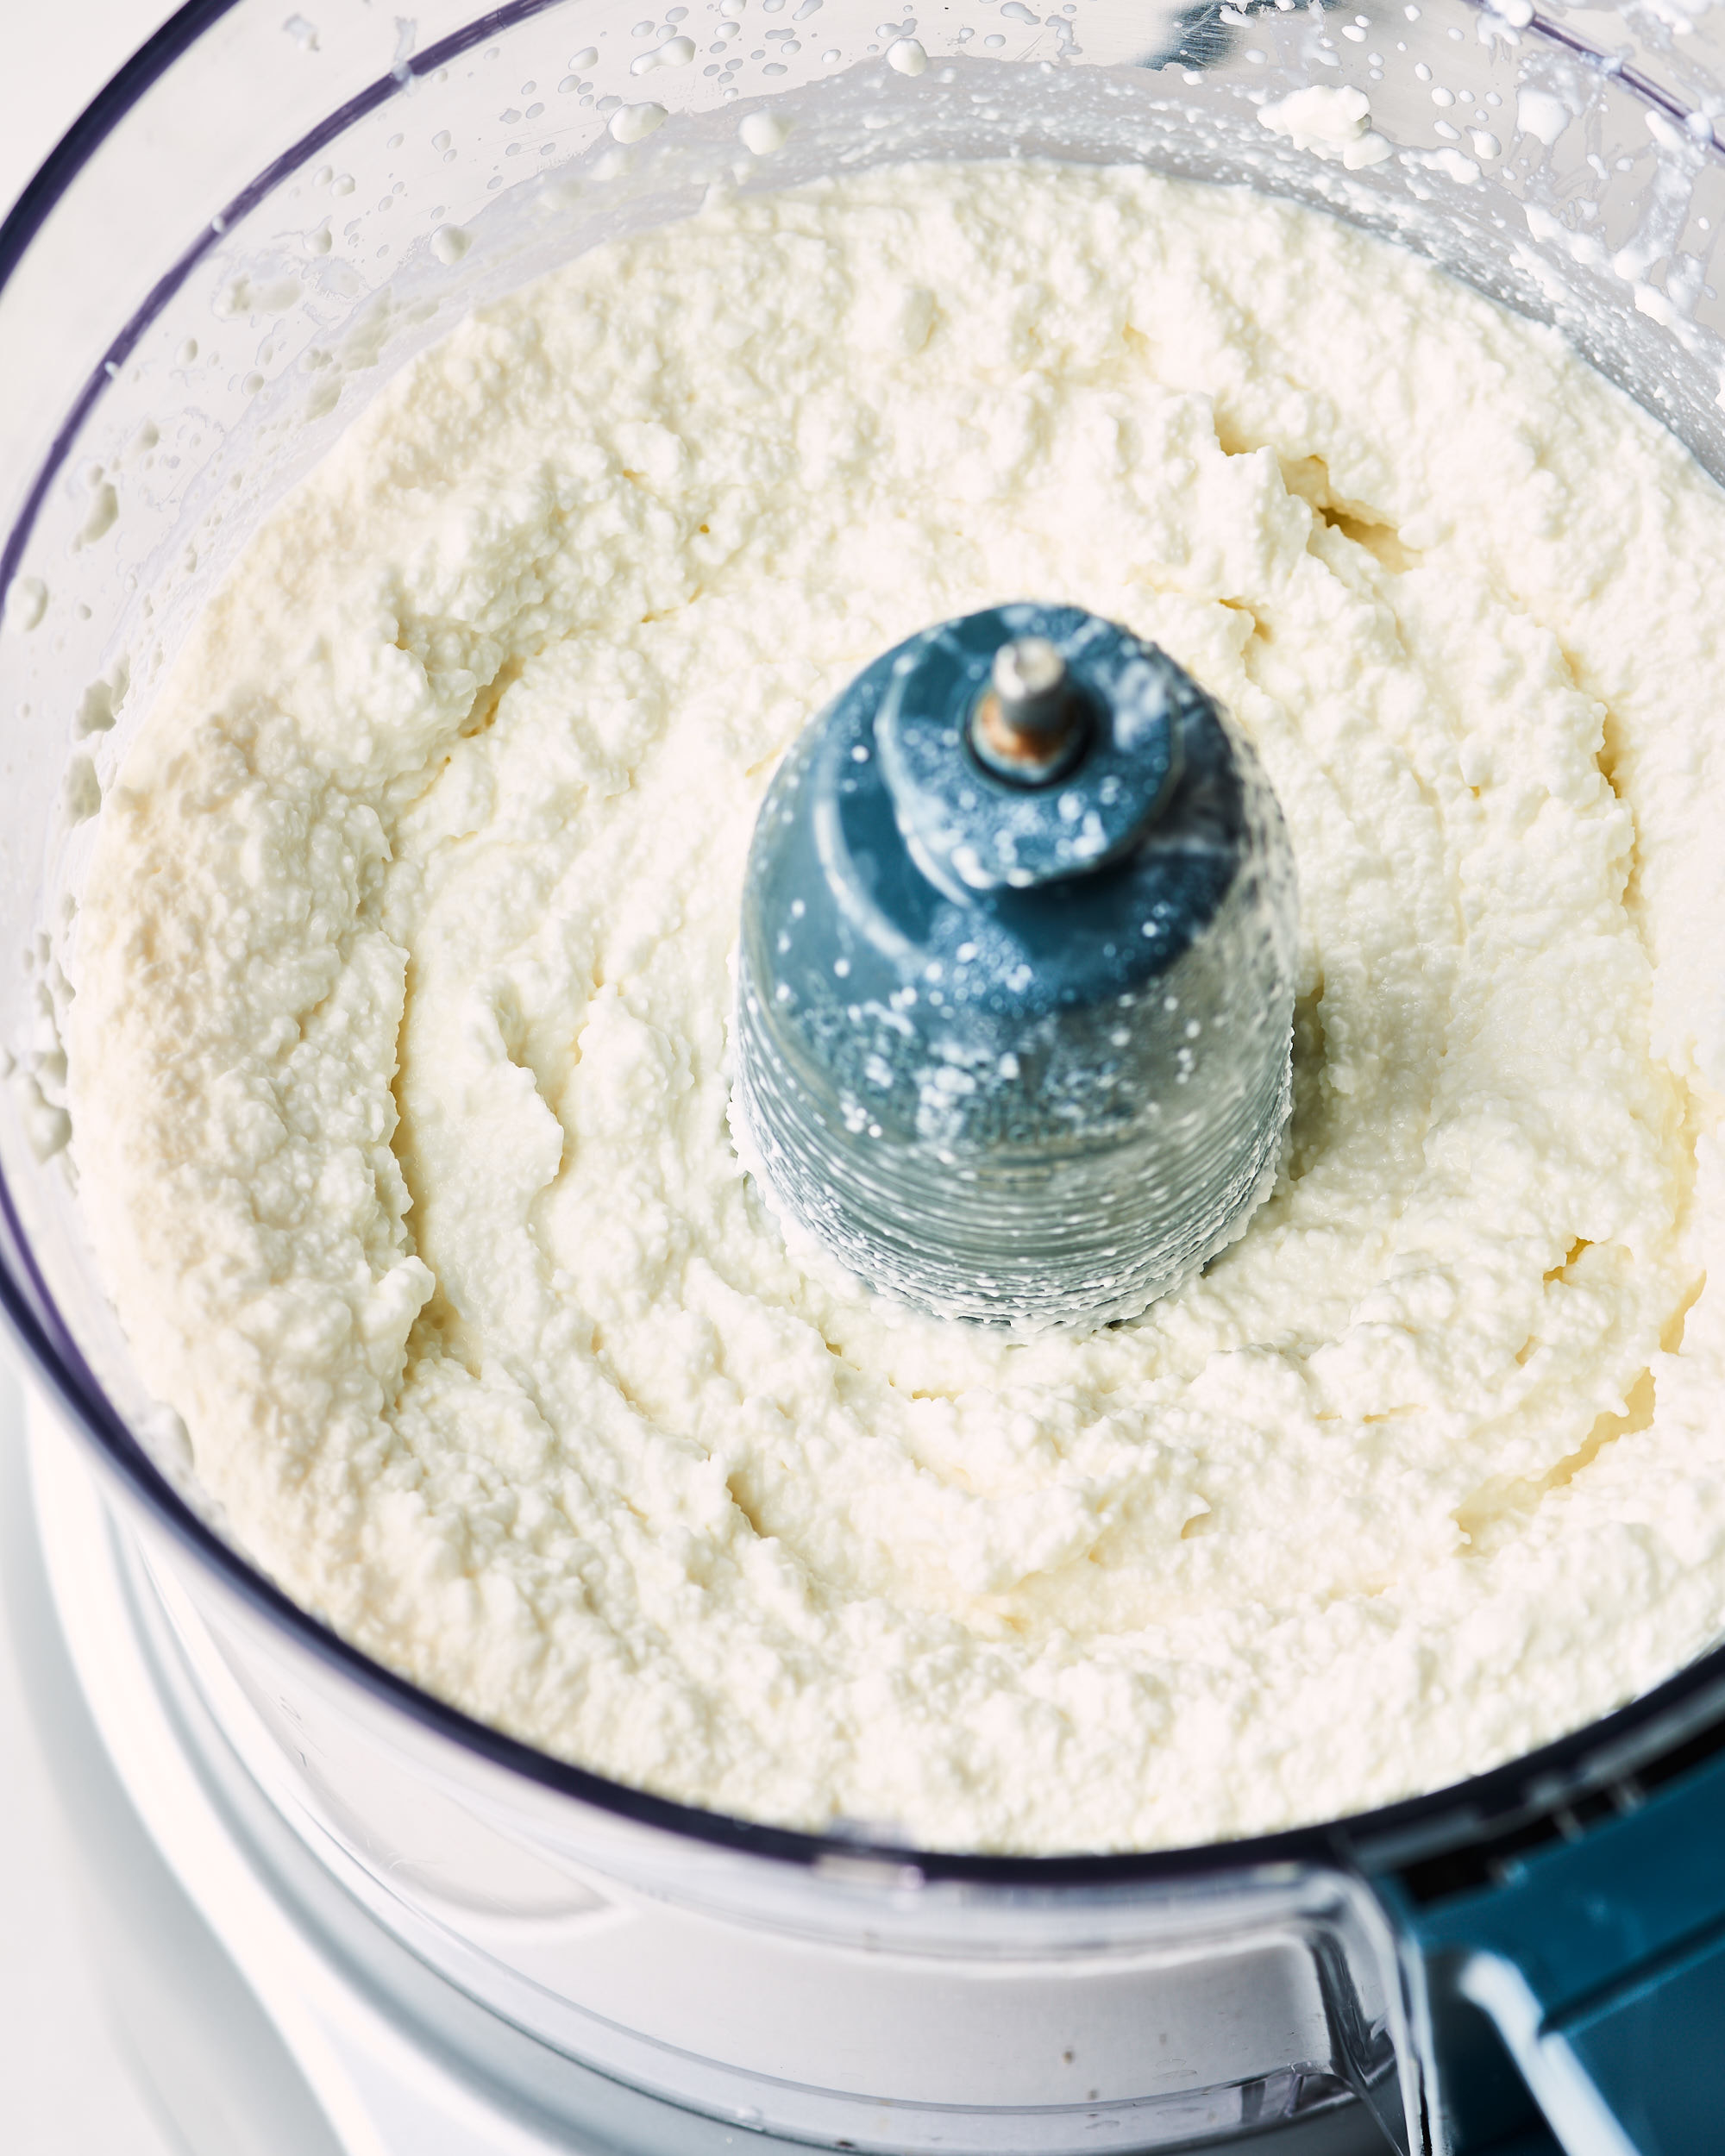 Cottage cheese in a food processor.